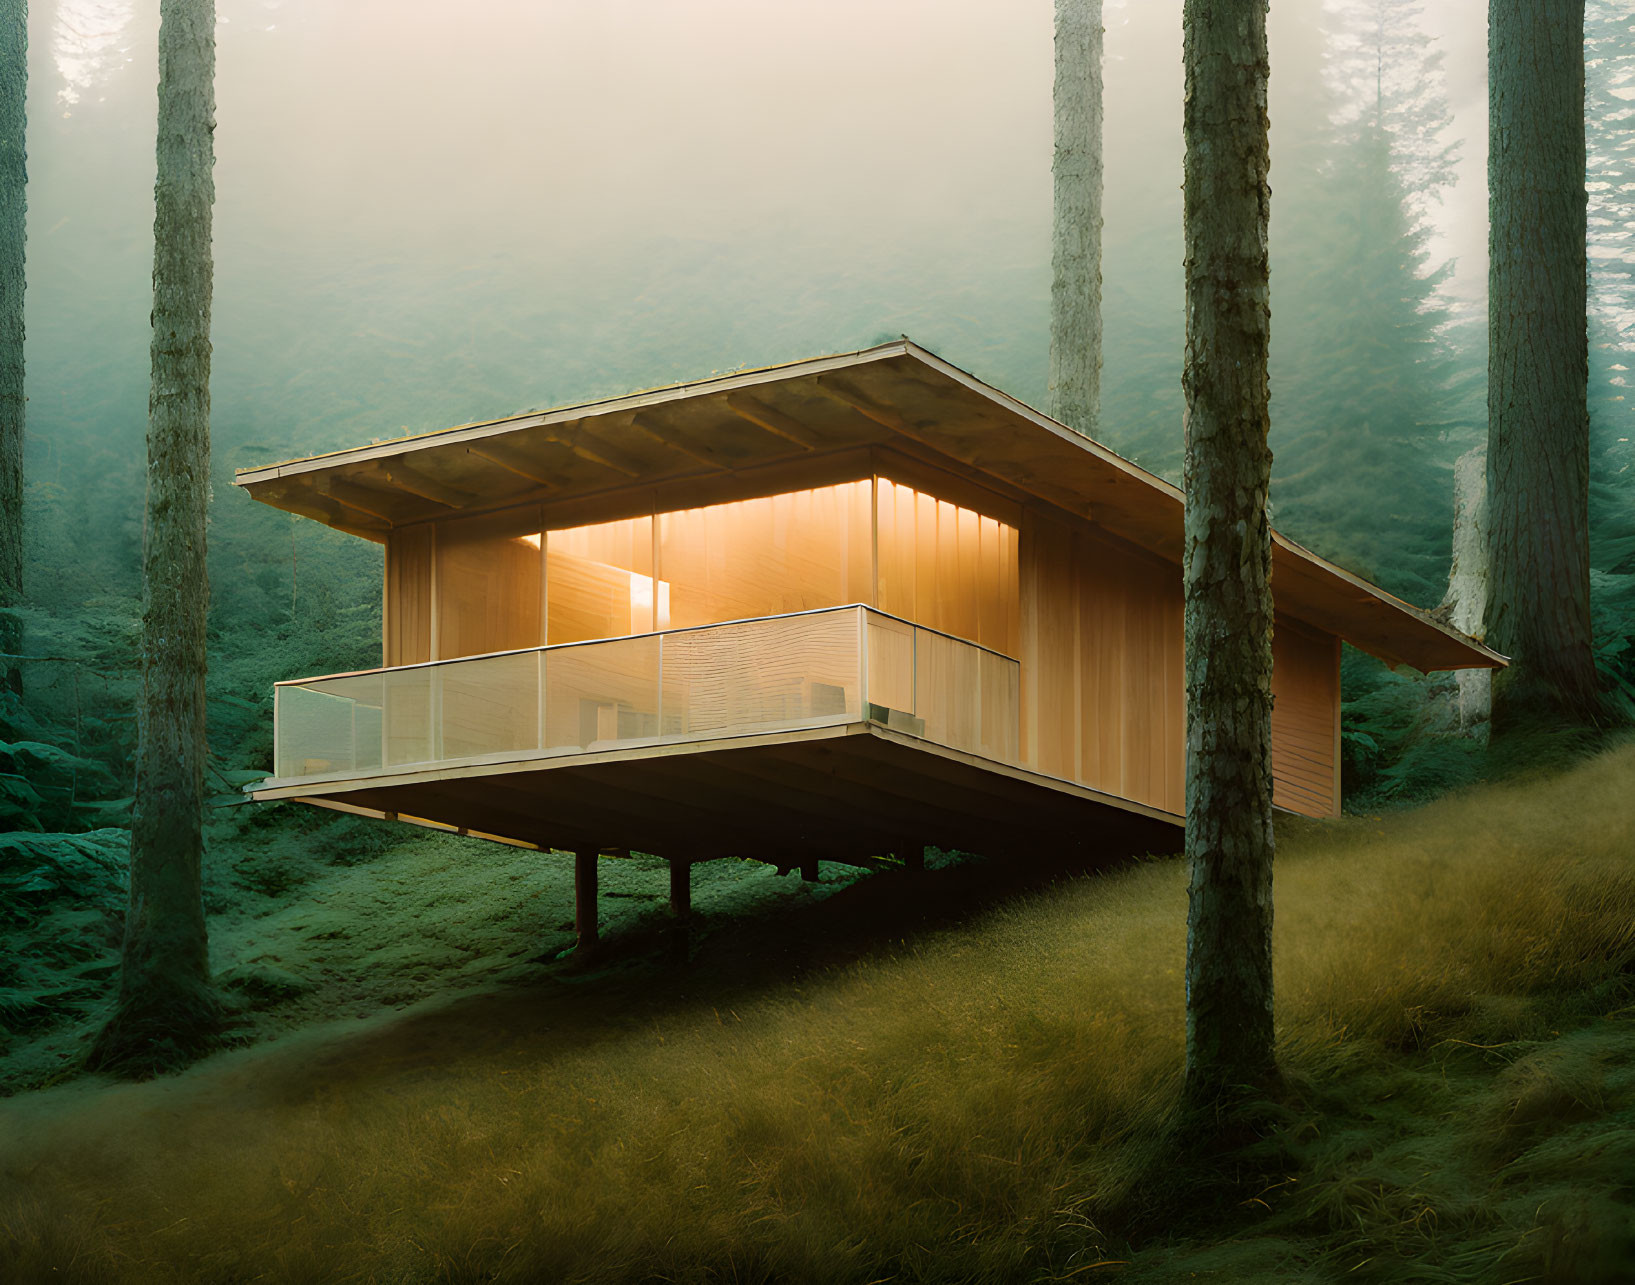 Modern wooden cabin on stilts in misty forest with warm light and lush green trees.